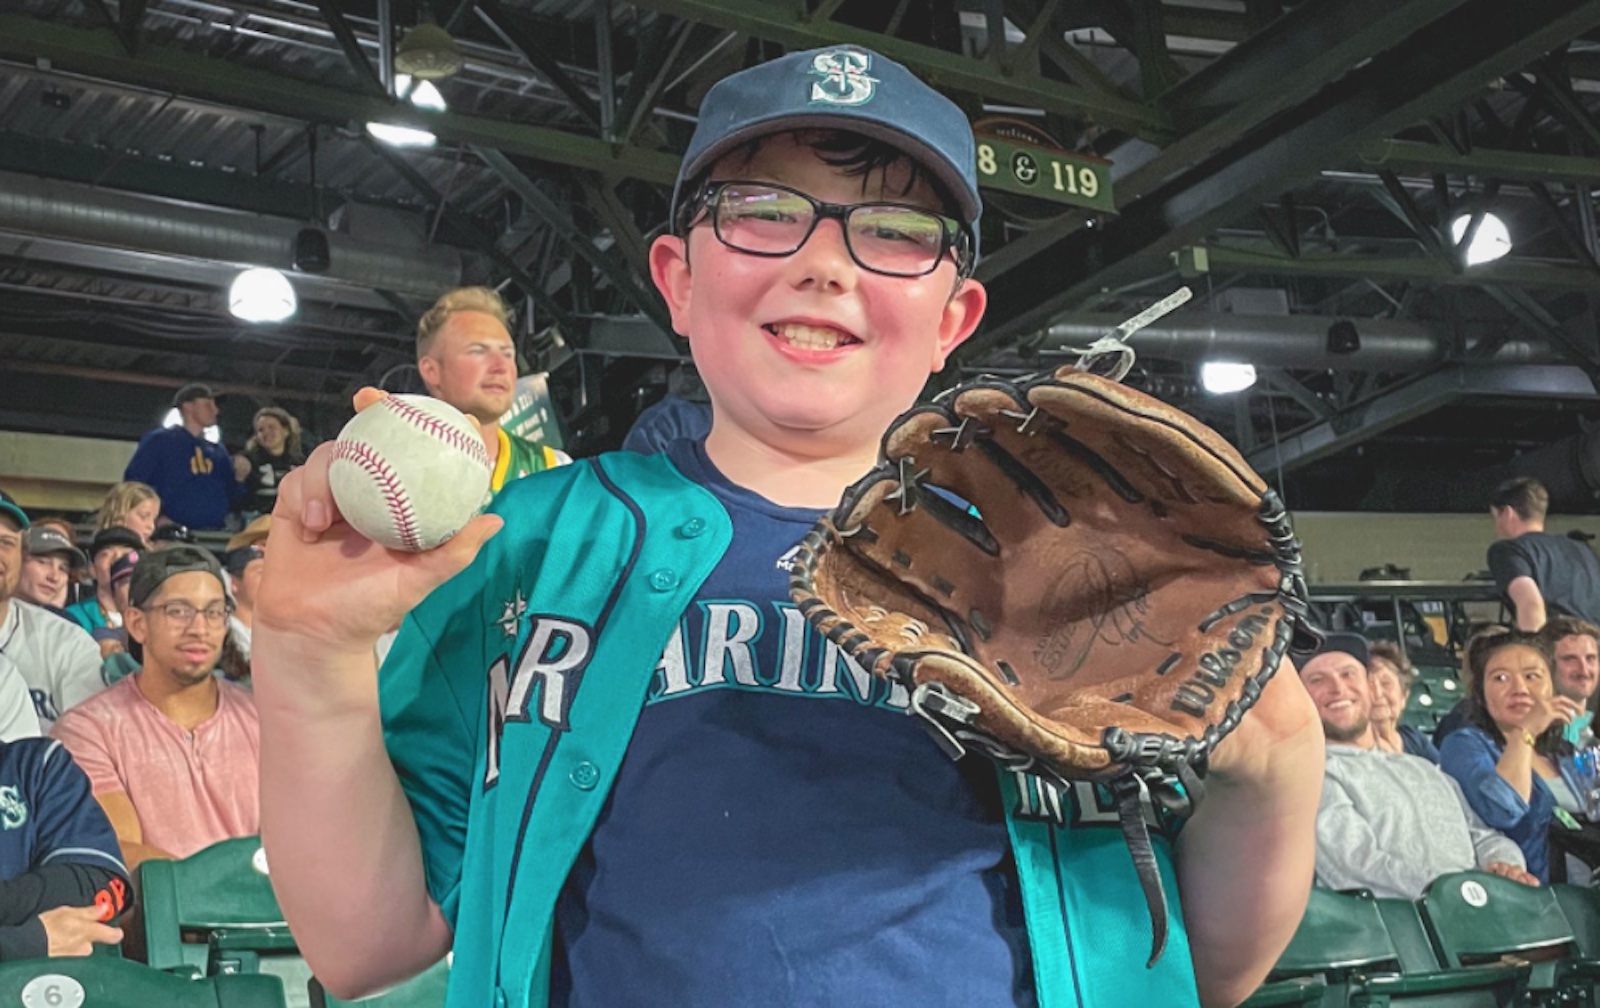 Video: Mariners hook up 'Rally Kid' after exciting win over Angels